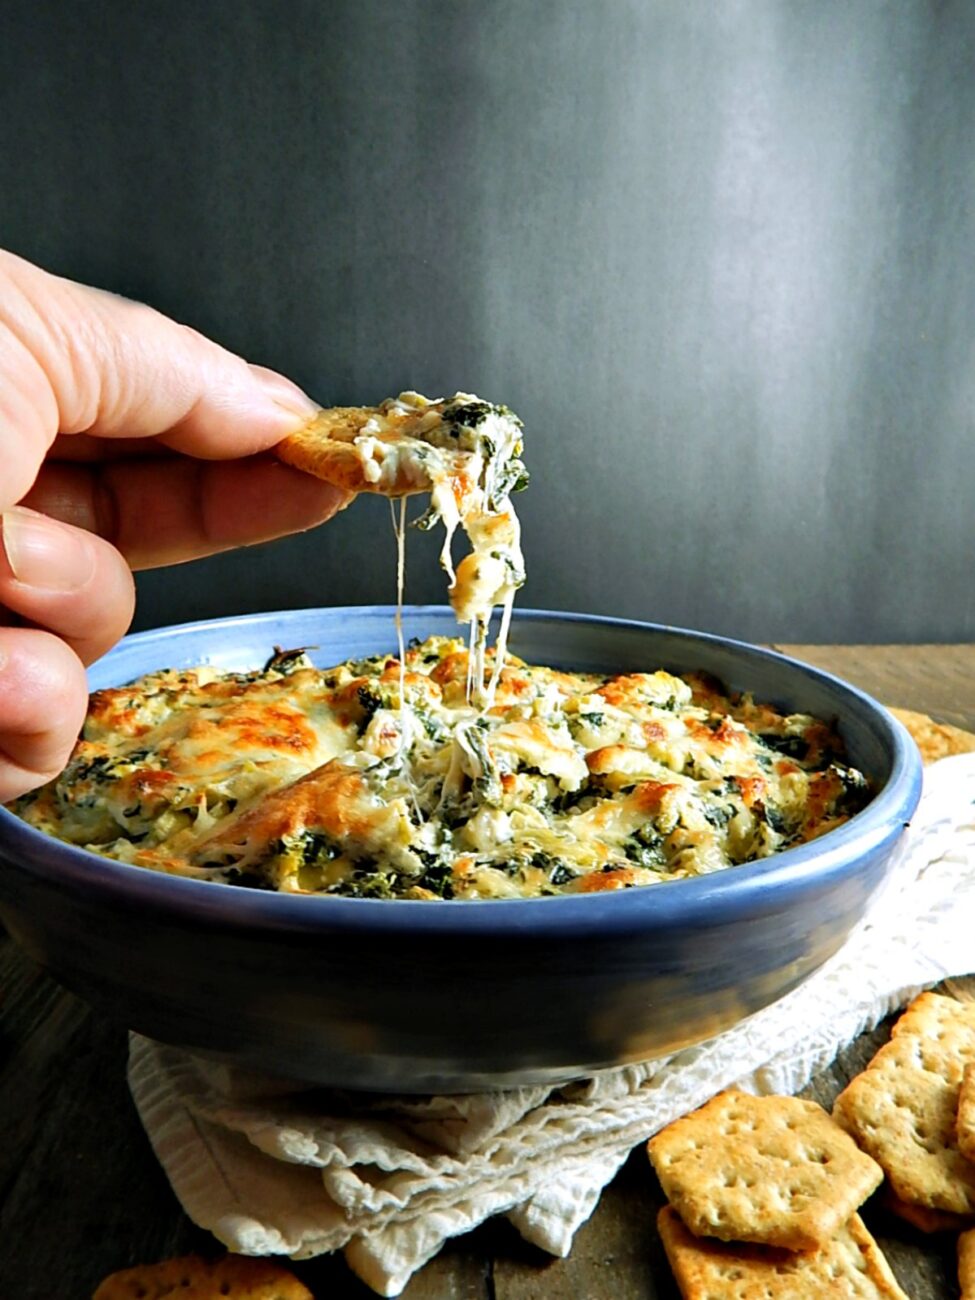 Zesty Spinach Dip Recipe: A Flavorful Twist on a Classic